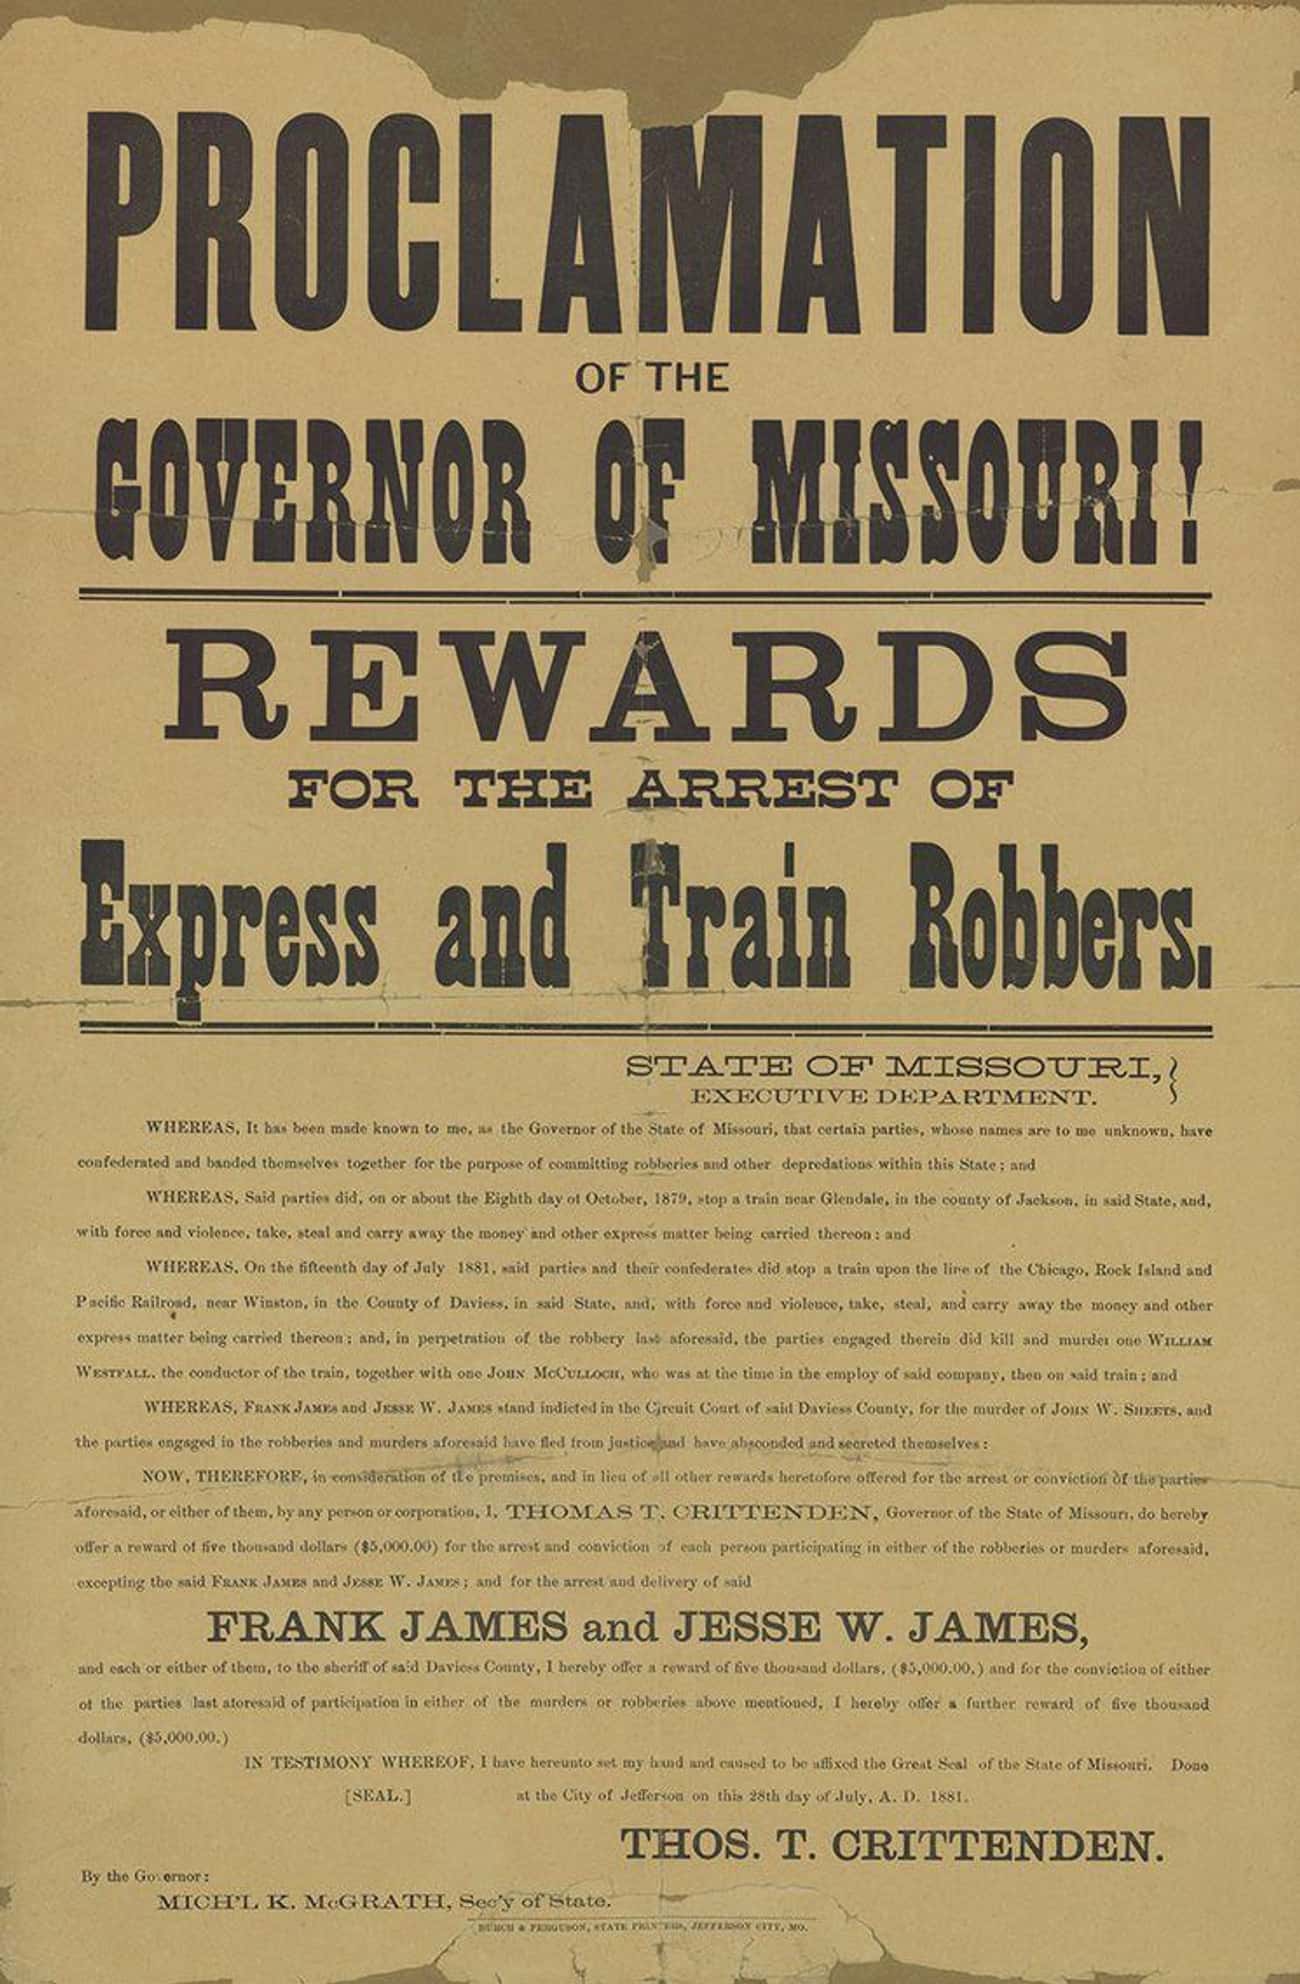 Proclamation of the Governor of Missouri (1881)